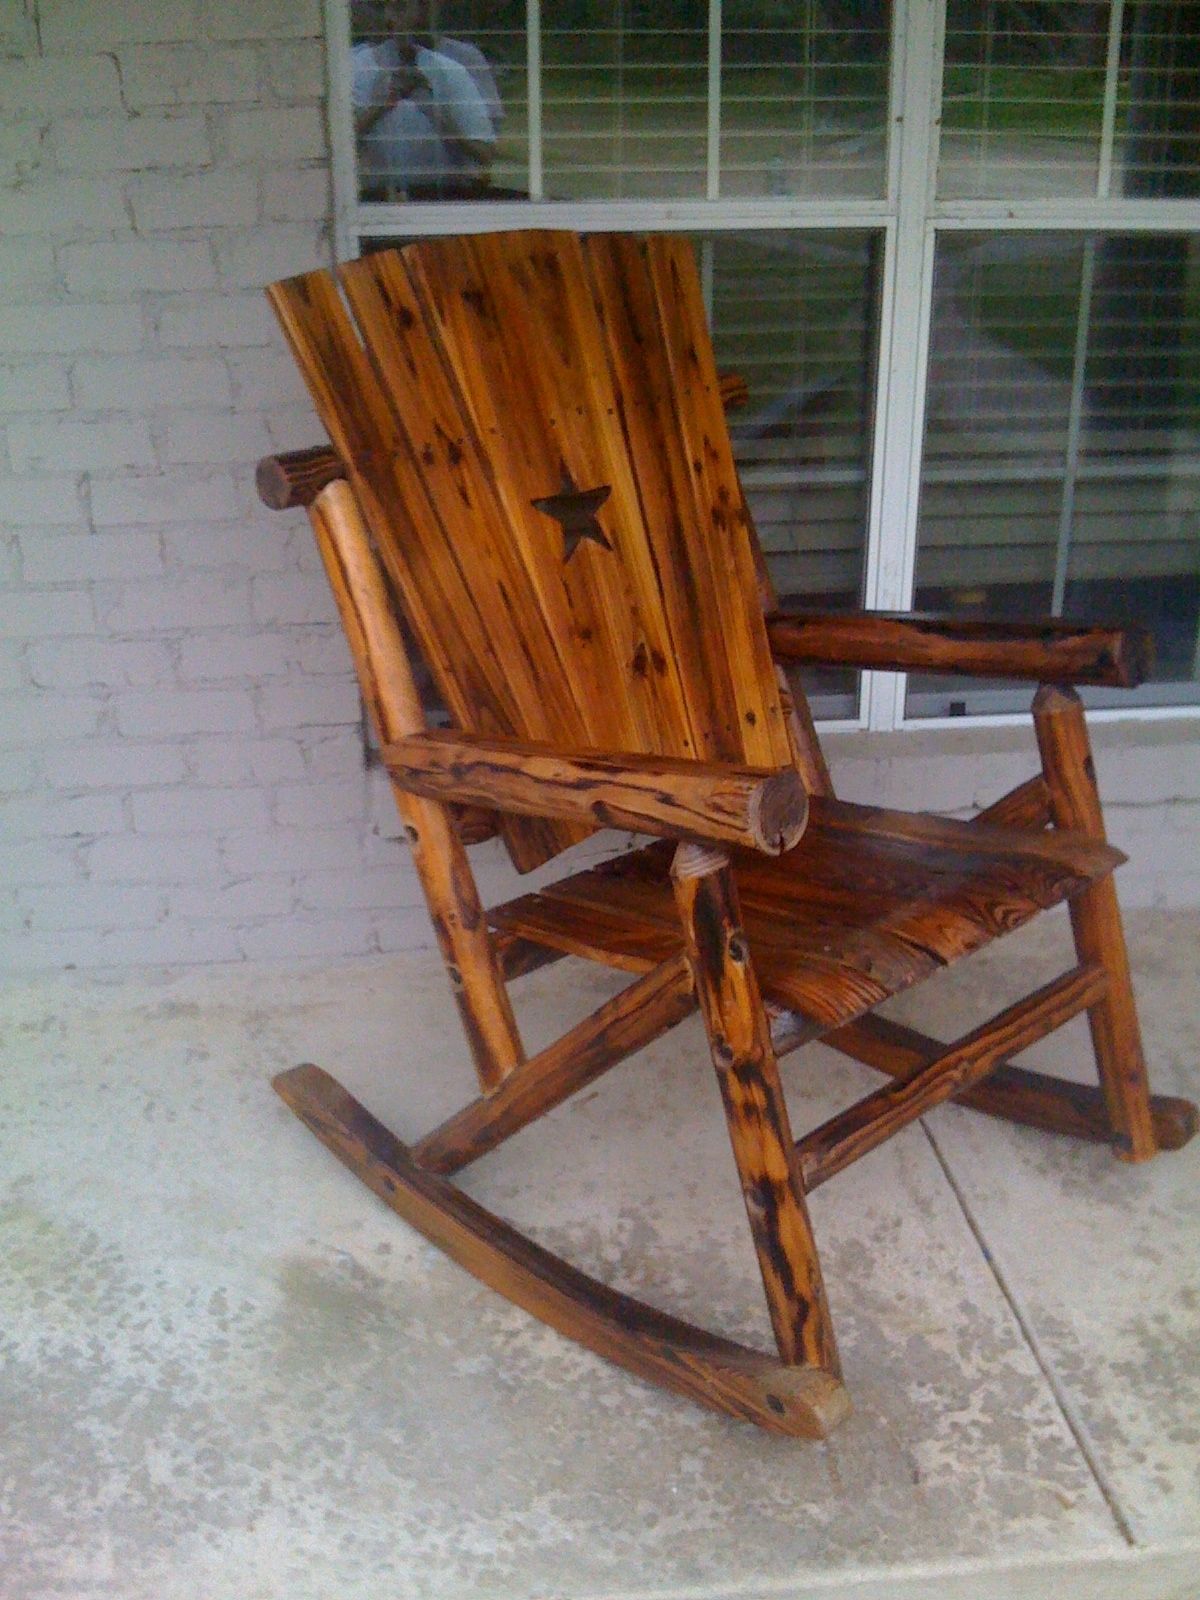 Most Popular Patio Garden Outdoor Rocking Chairs Top Porch Classic Enjoyment Throughout Wooden Patio Rocking Chairs (View 6 of 20)